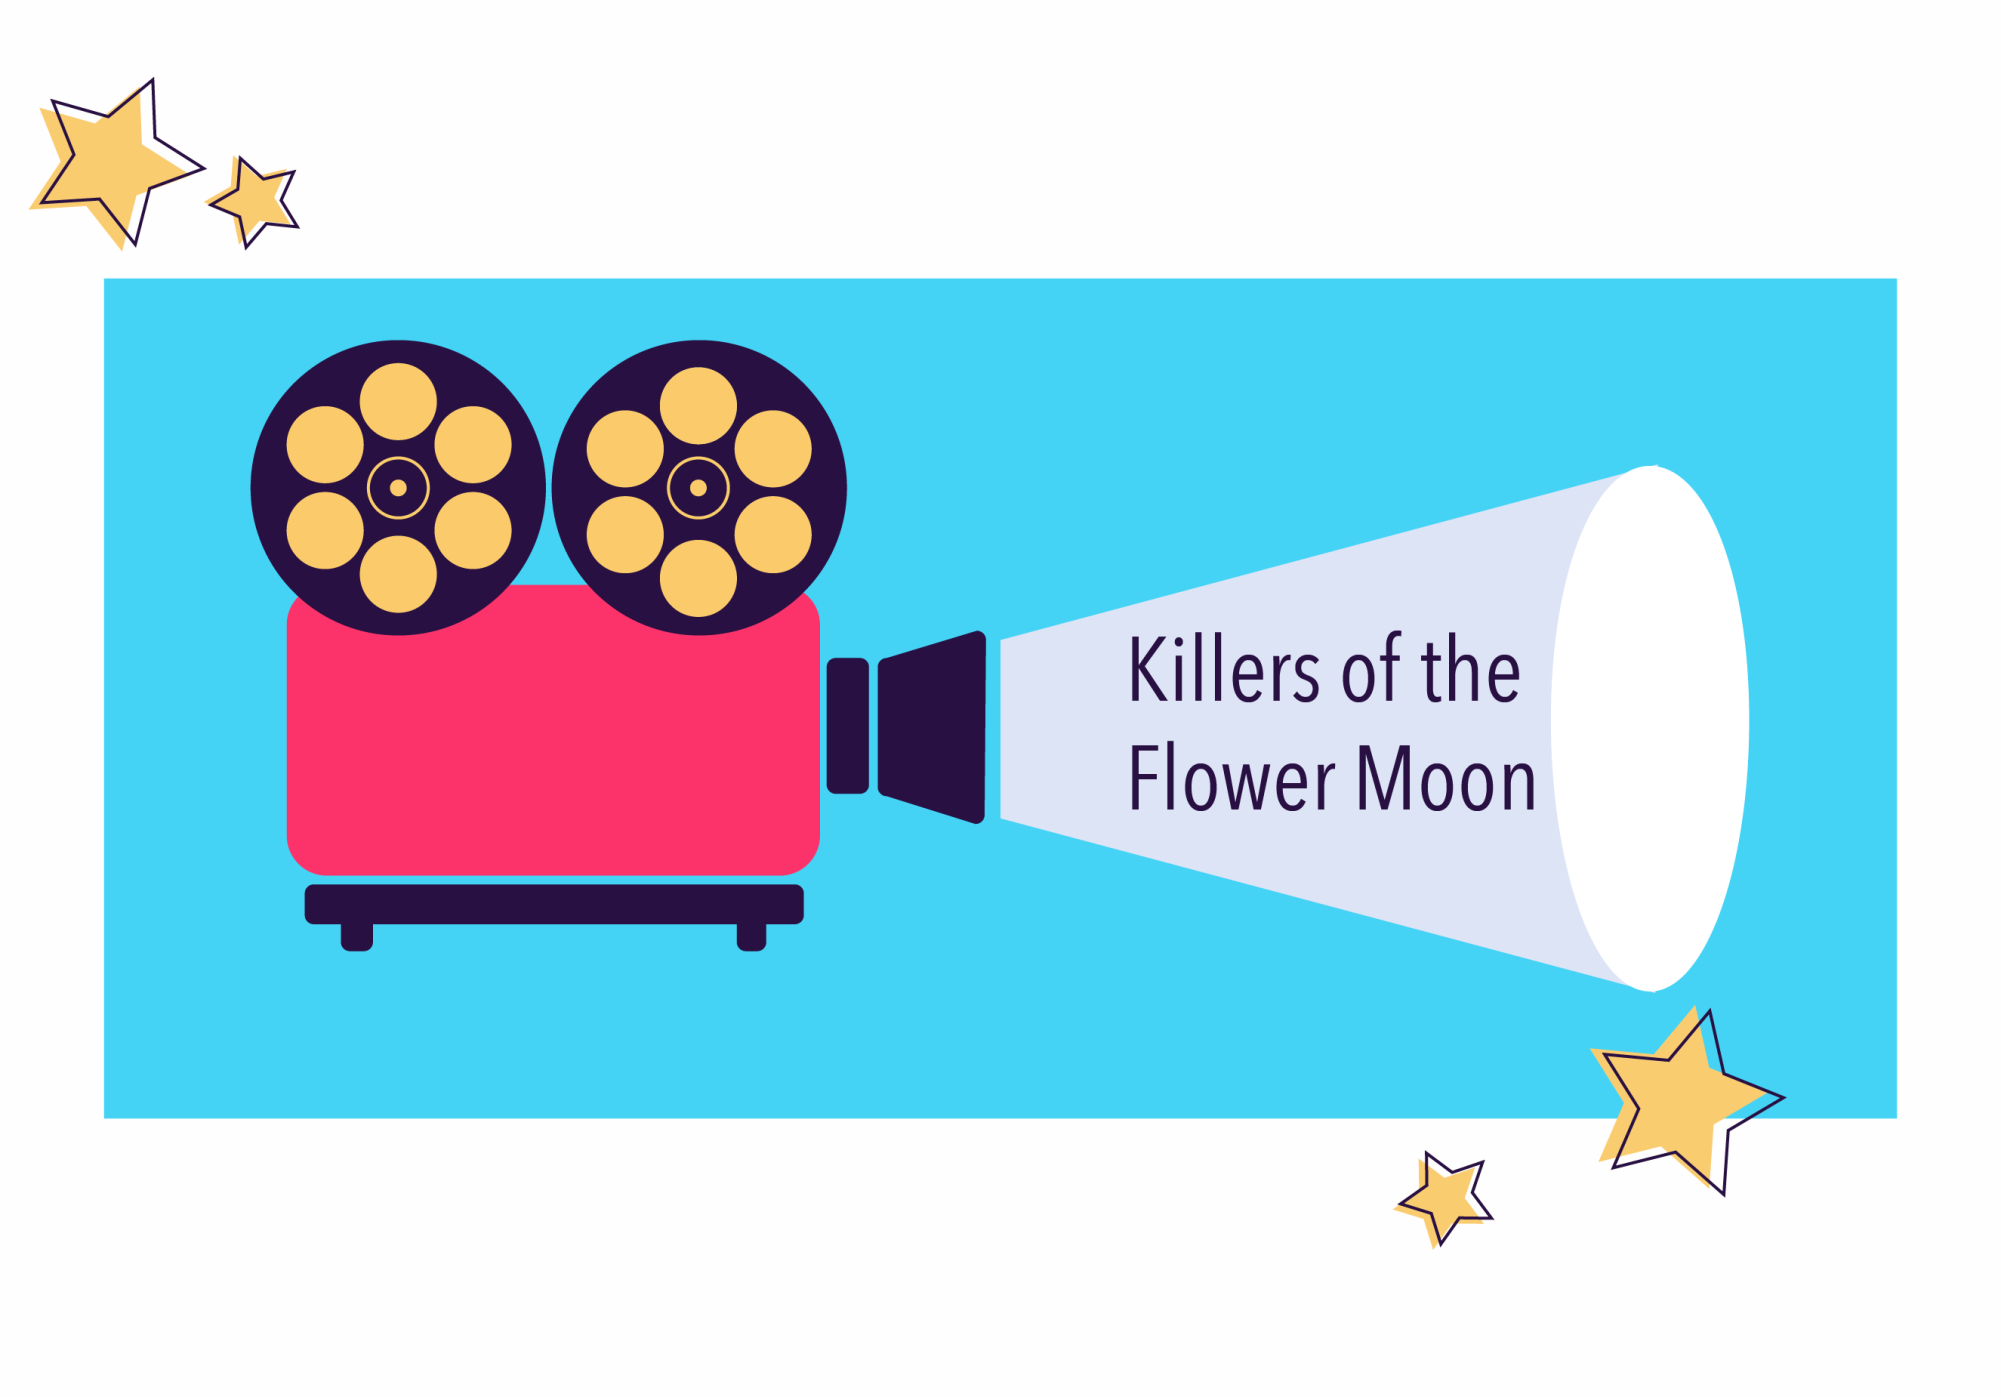 Swift bests Scorsese at box office, but 'Killers of the Flower Moon' opens  strongly